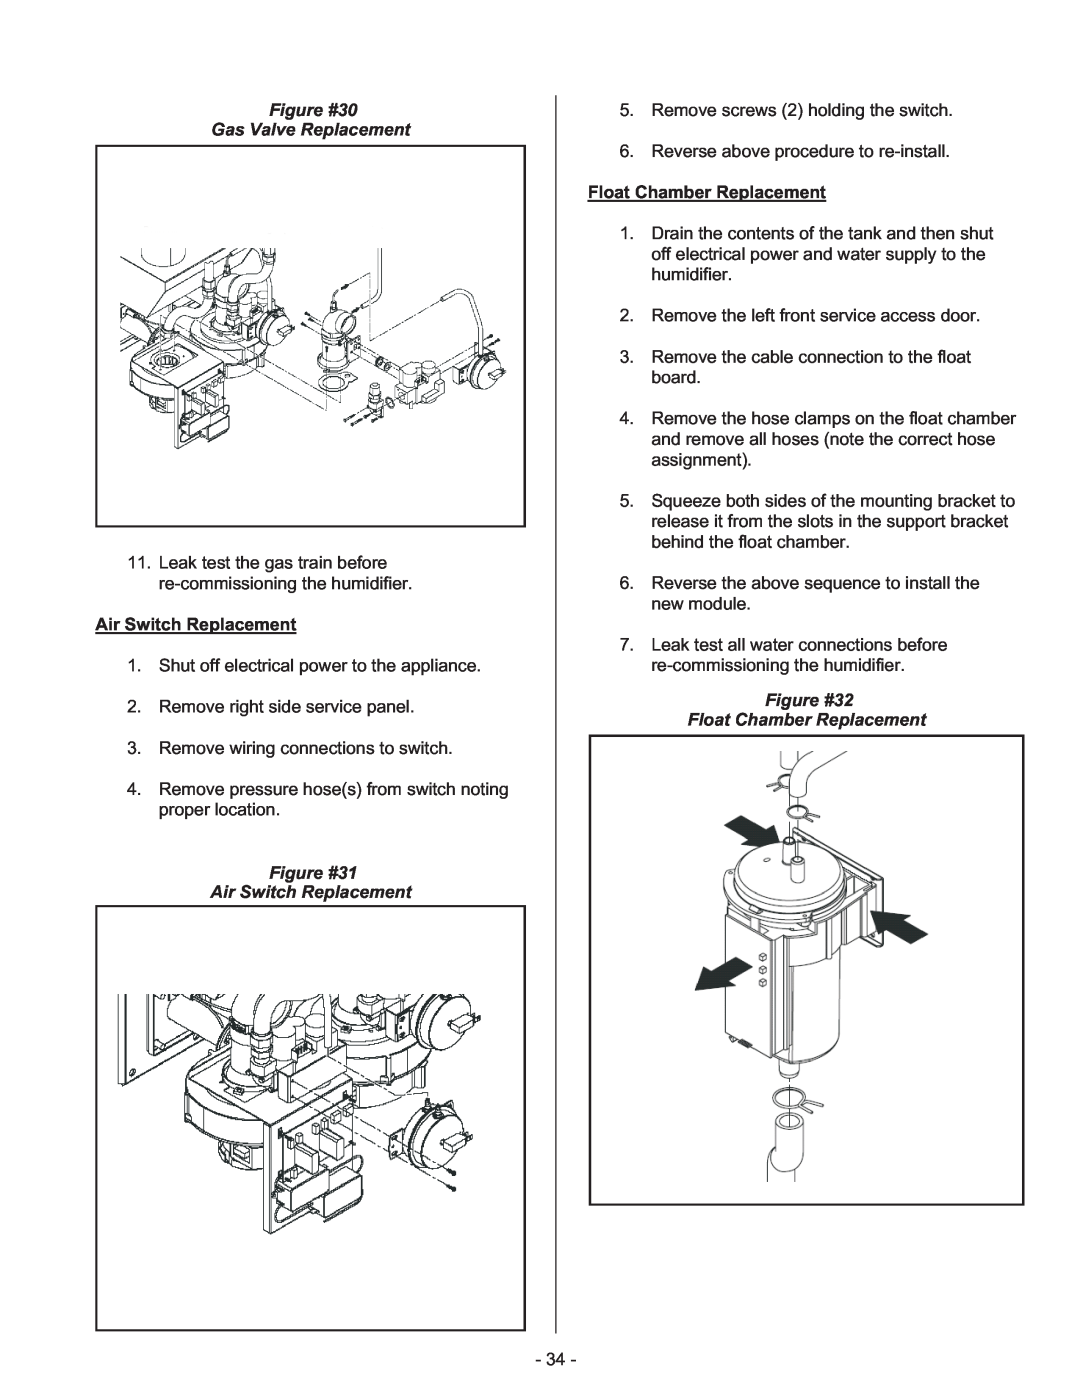 Nortec Industries GS Series manual Figure #30 Gas Valve Replacement, Figure #31 Air Switch Replacement 